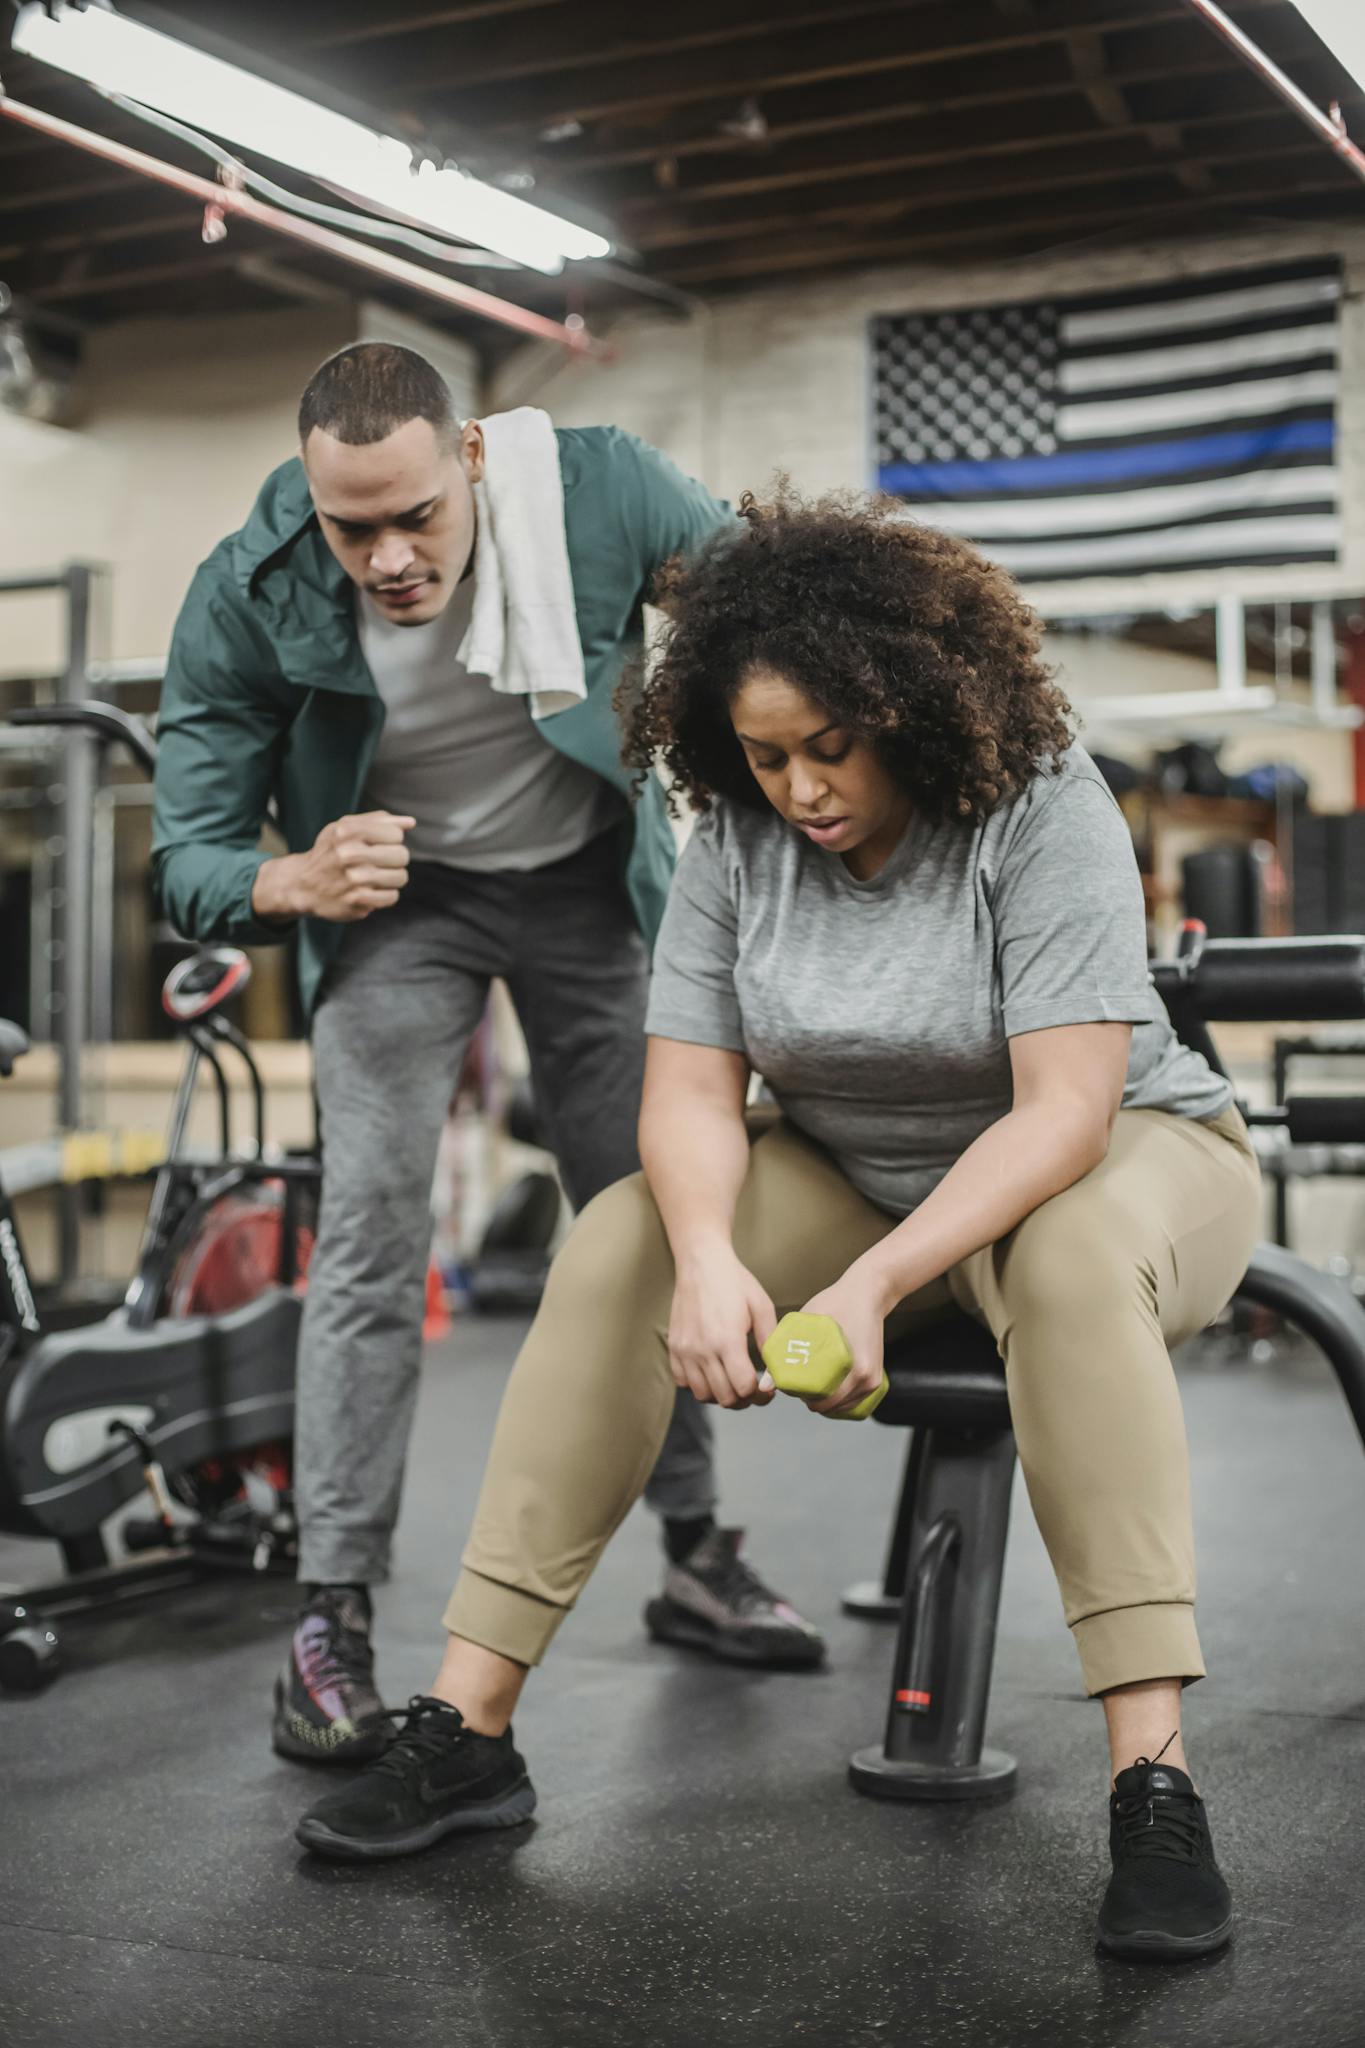 Trainer helping plump woman exercising with dumbbell